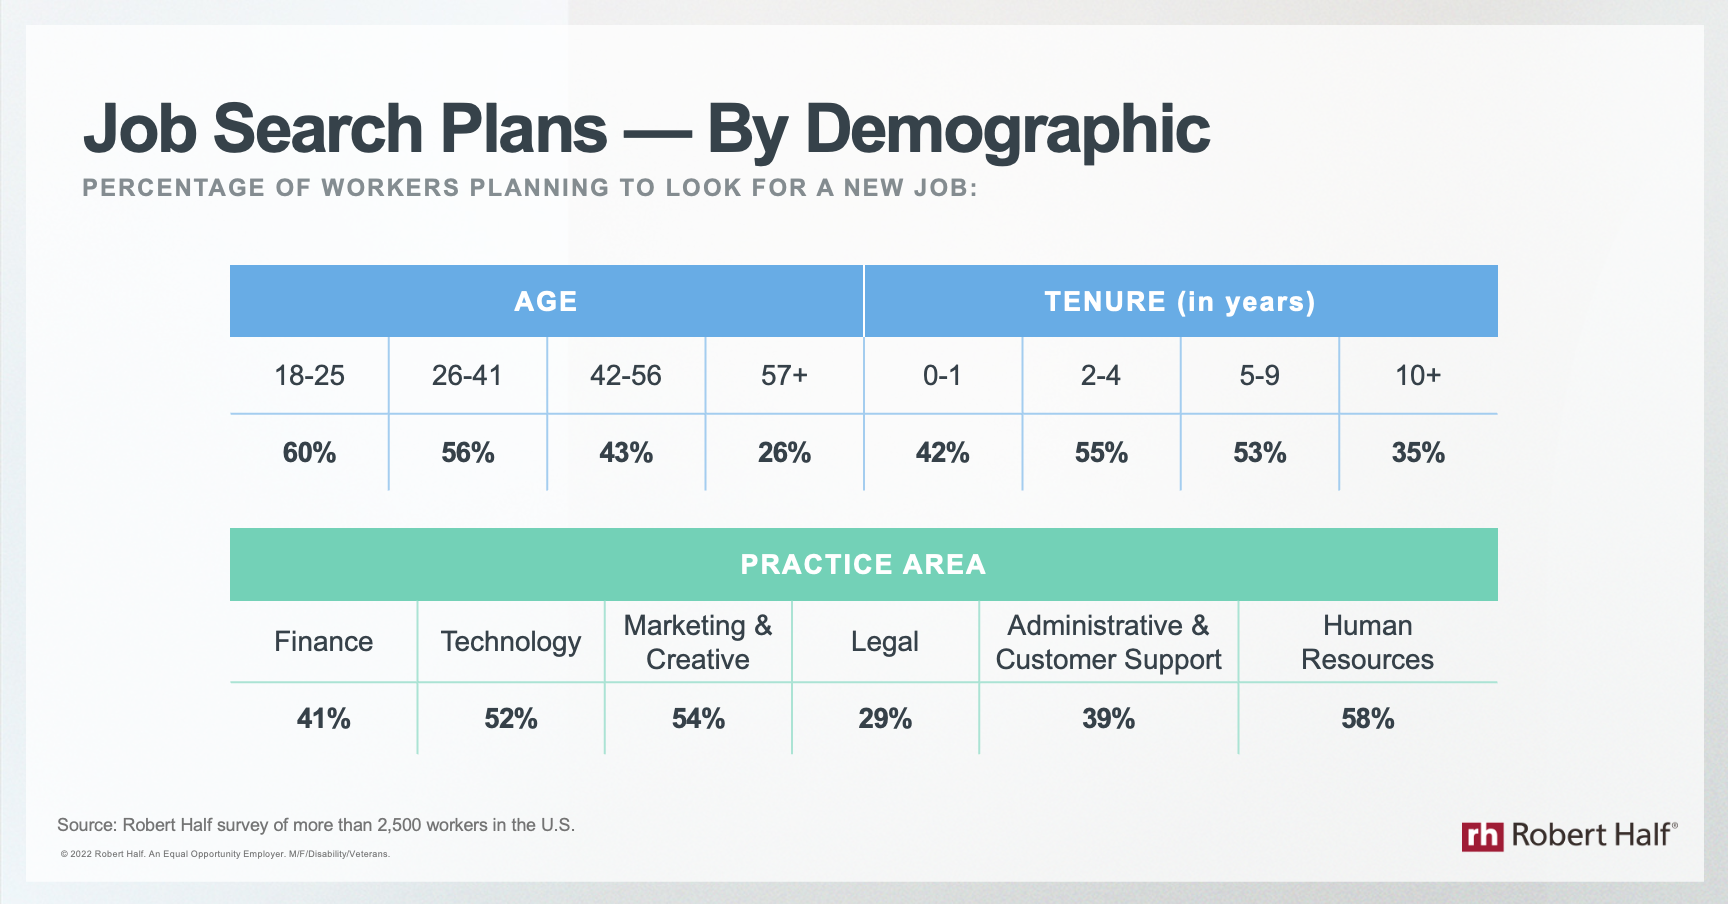 Job Search Plans - By Demographic